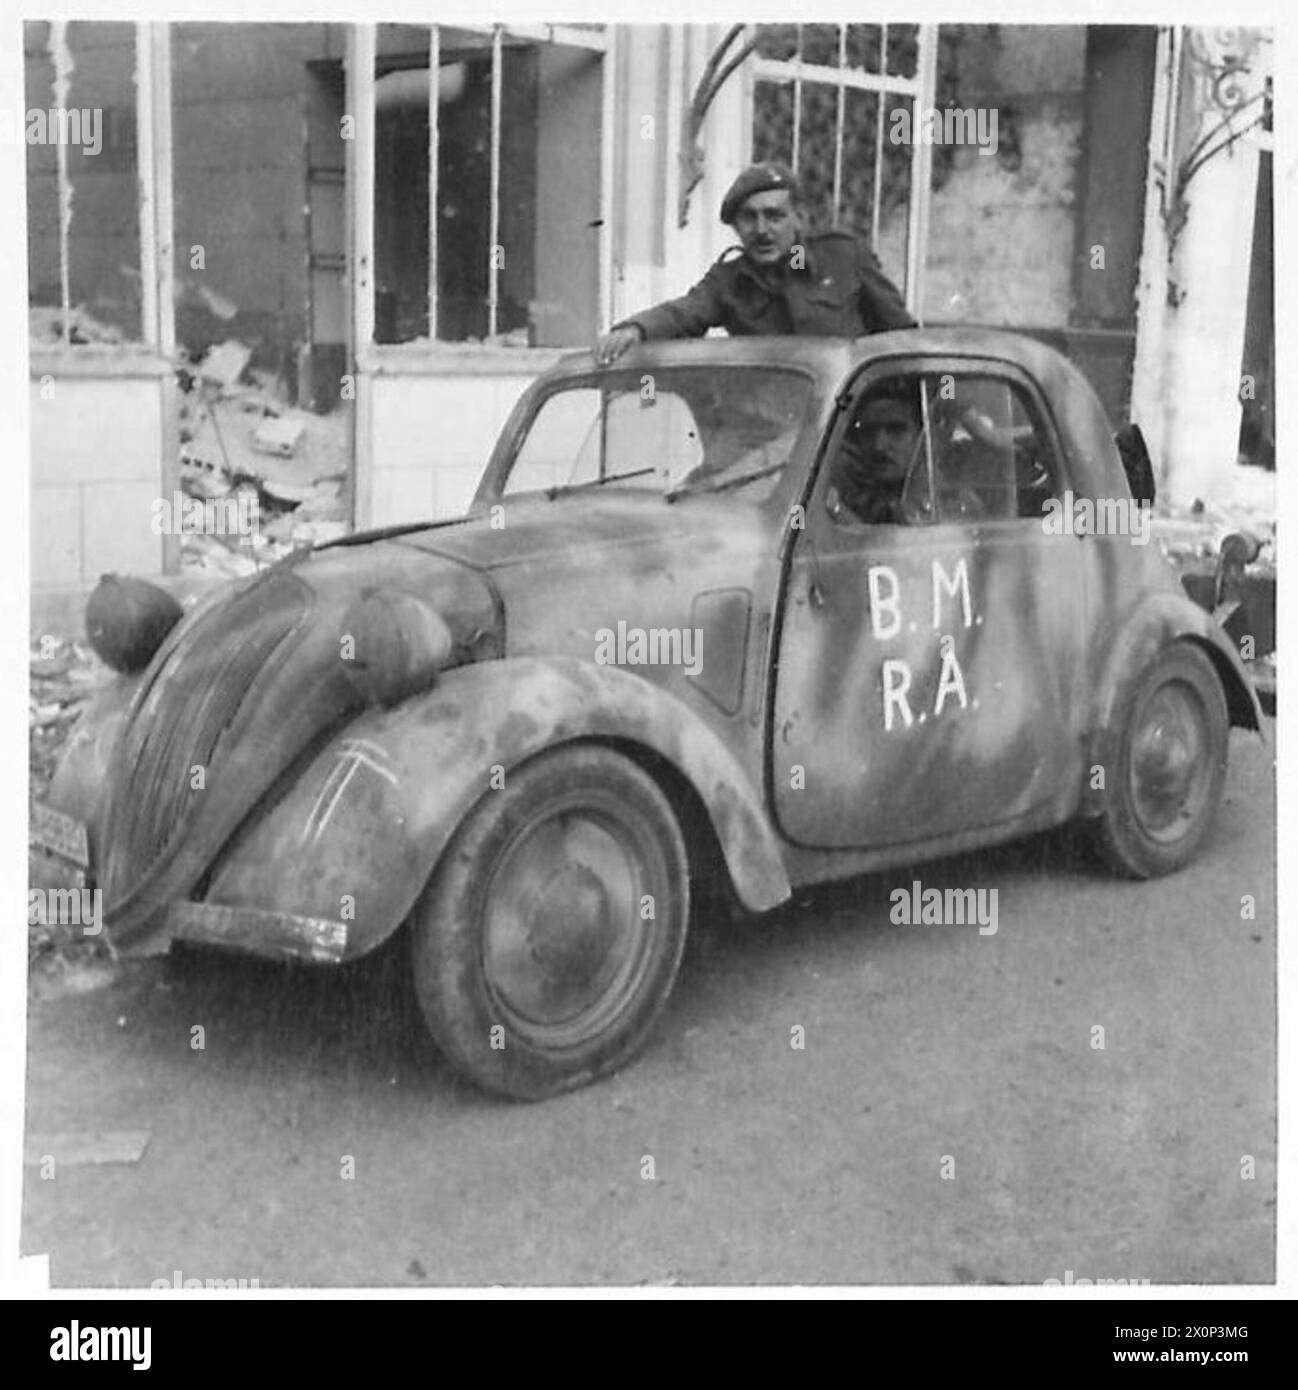 THE BRITISH ARMY IN THE NORMANDY CAMPAIGN 1944 - A Royal Artillery officer, Lt Peter Ronald, and his driver E N Briscomb, of 50th Division, in a French Citroen staff car captured from the Germans, Bayeux, 9 June 1944. The car is marked 'BM RA' (Brigade Major Royal Artillery), and has an arm of service serial ('40') and the 50th Division's 'Tyne Tees' formation sign chalked on the mudguard Stock Photo